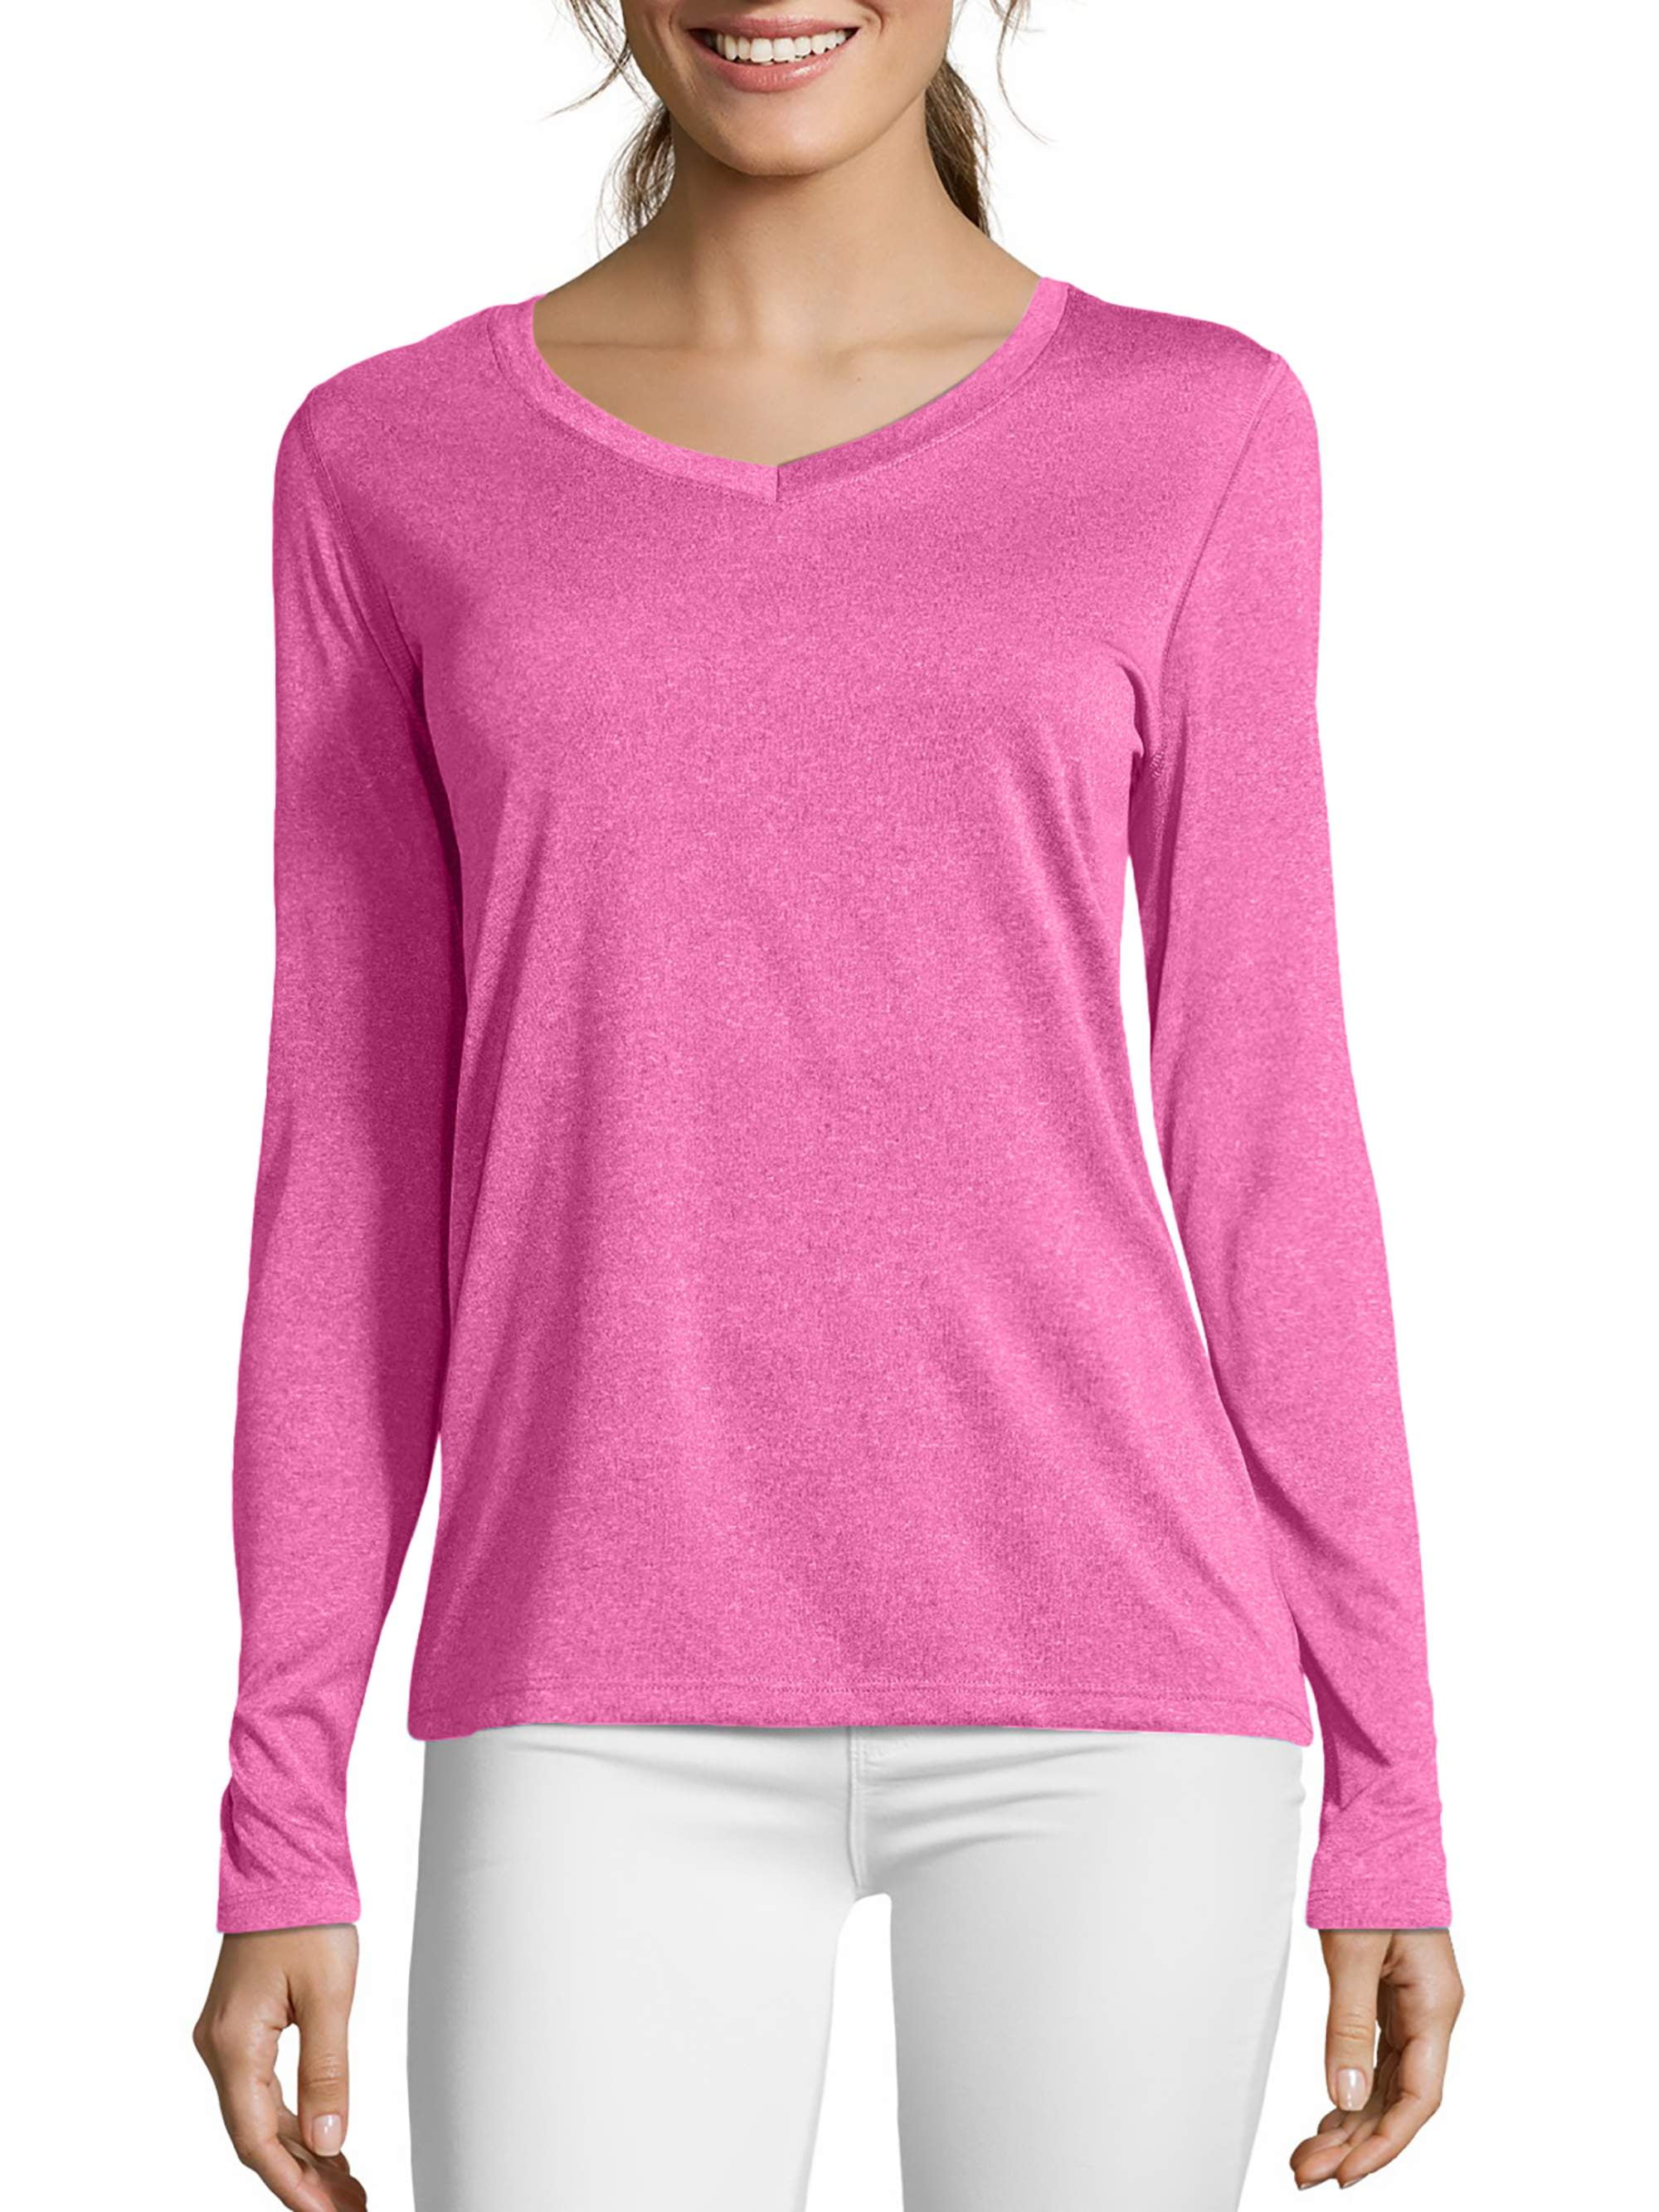 Details about   Hanes Sport Women's Cool DRI Performance Long Sleeve Tee  Small Razzle Pink 